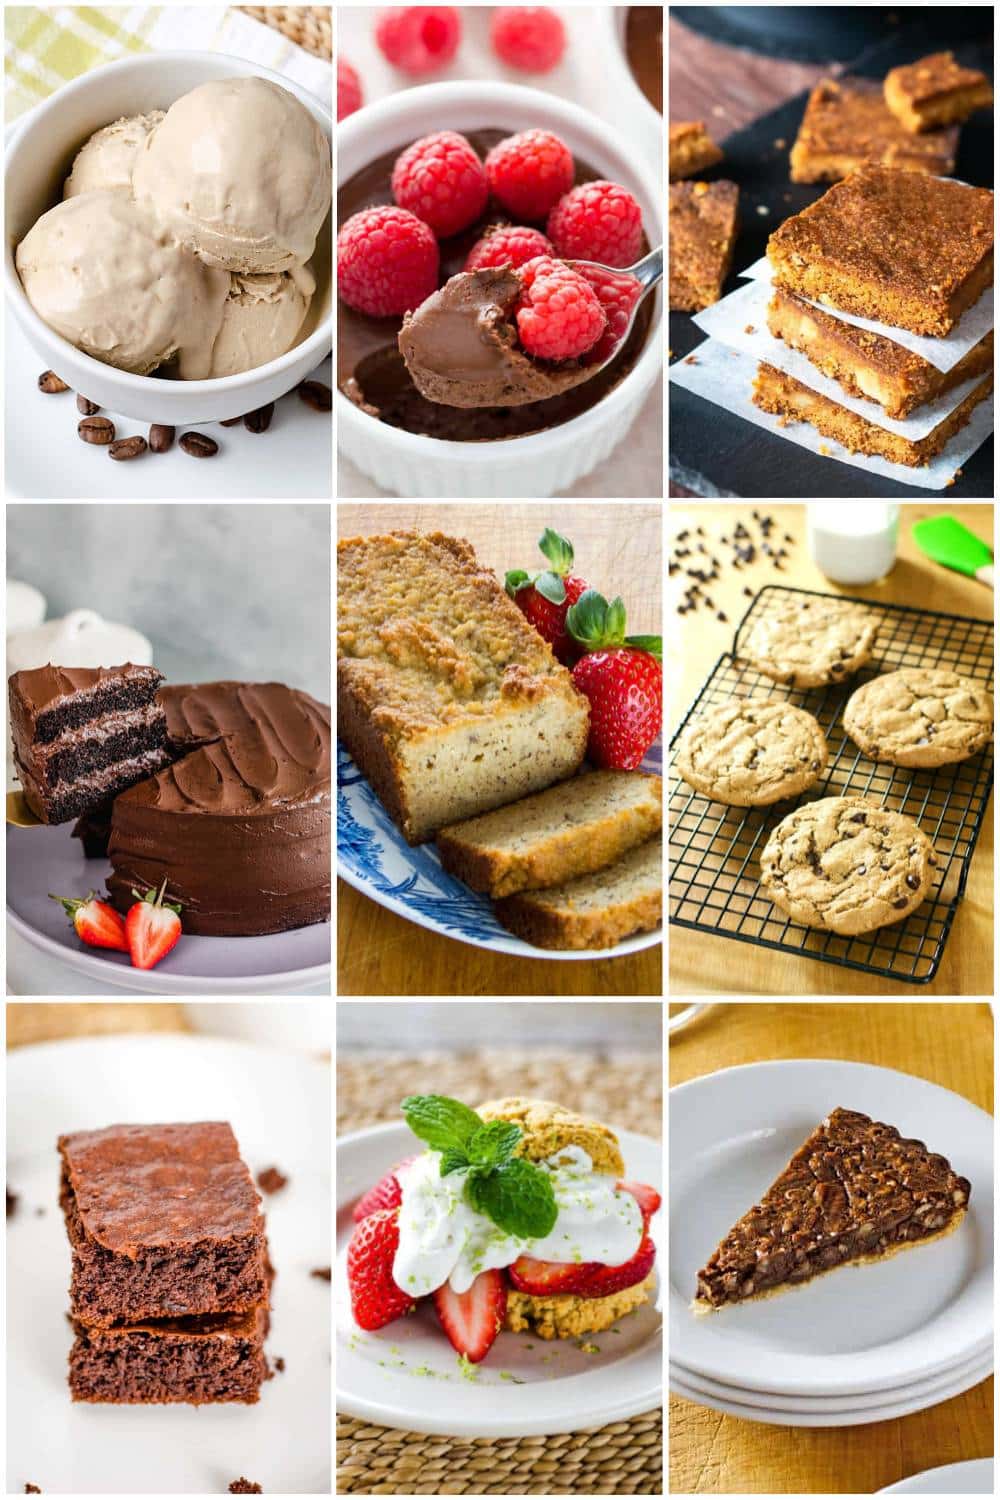 25 Easy and Delicious Gluten Free Dessert Recipes - Cook Eat Well